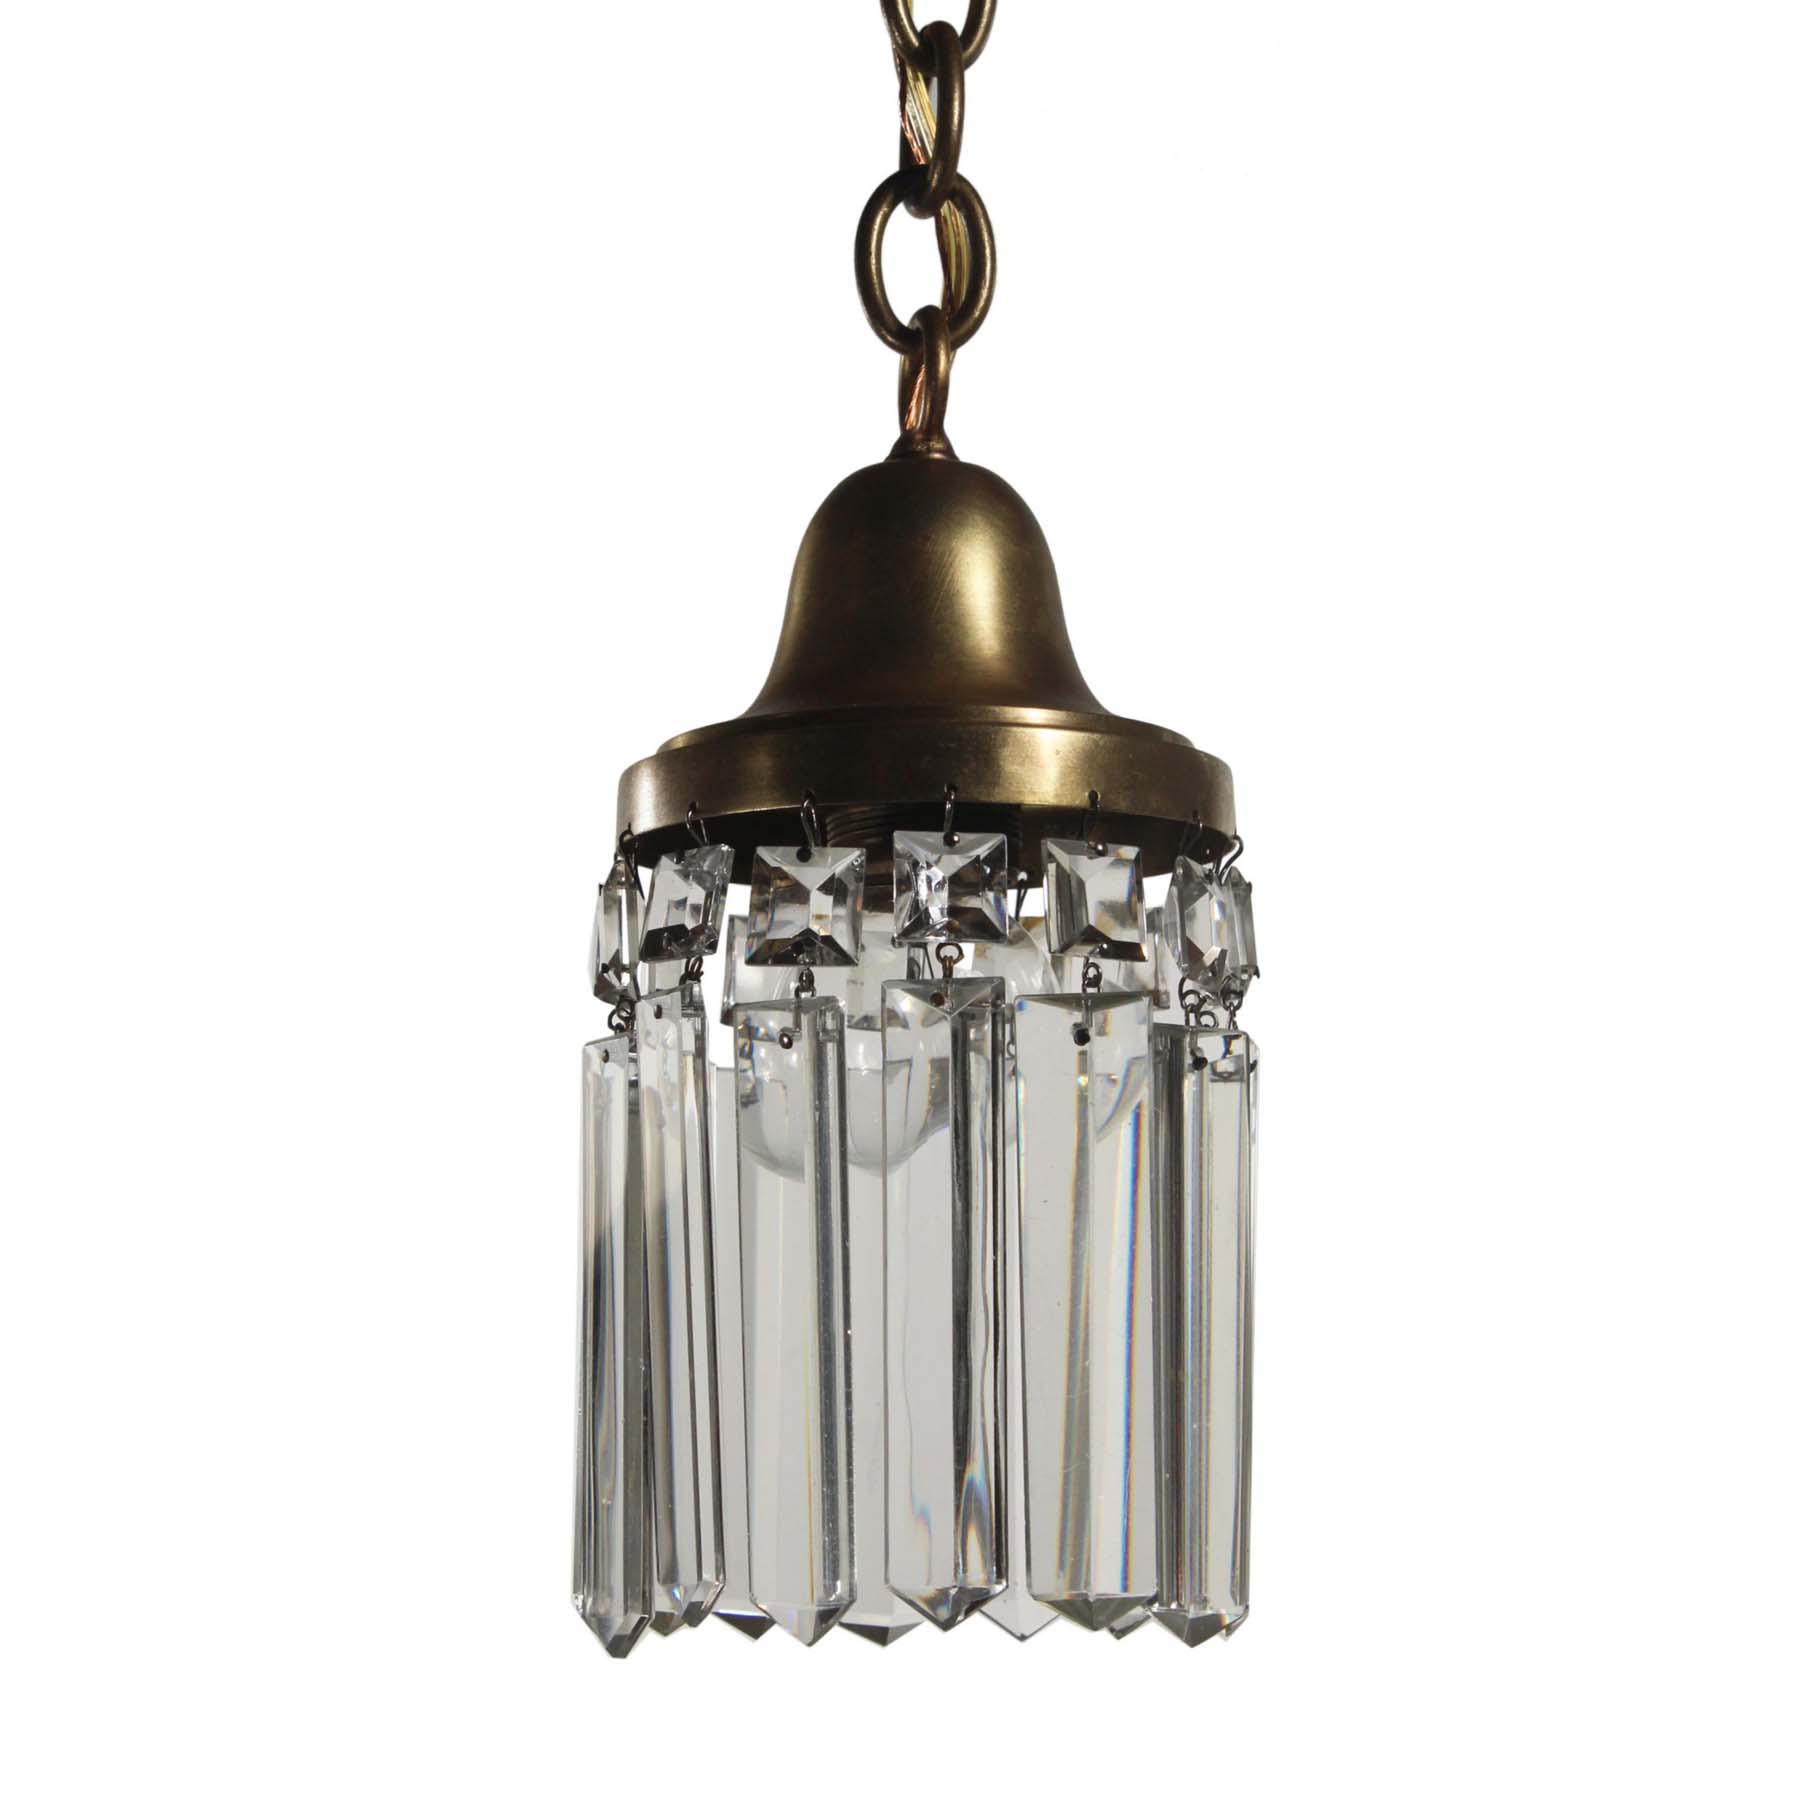 SOLD Antique Brass Pendant Light with Prisms, c. 1900-0